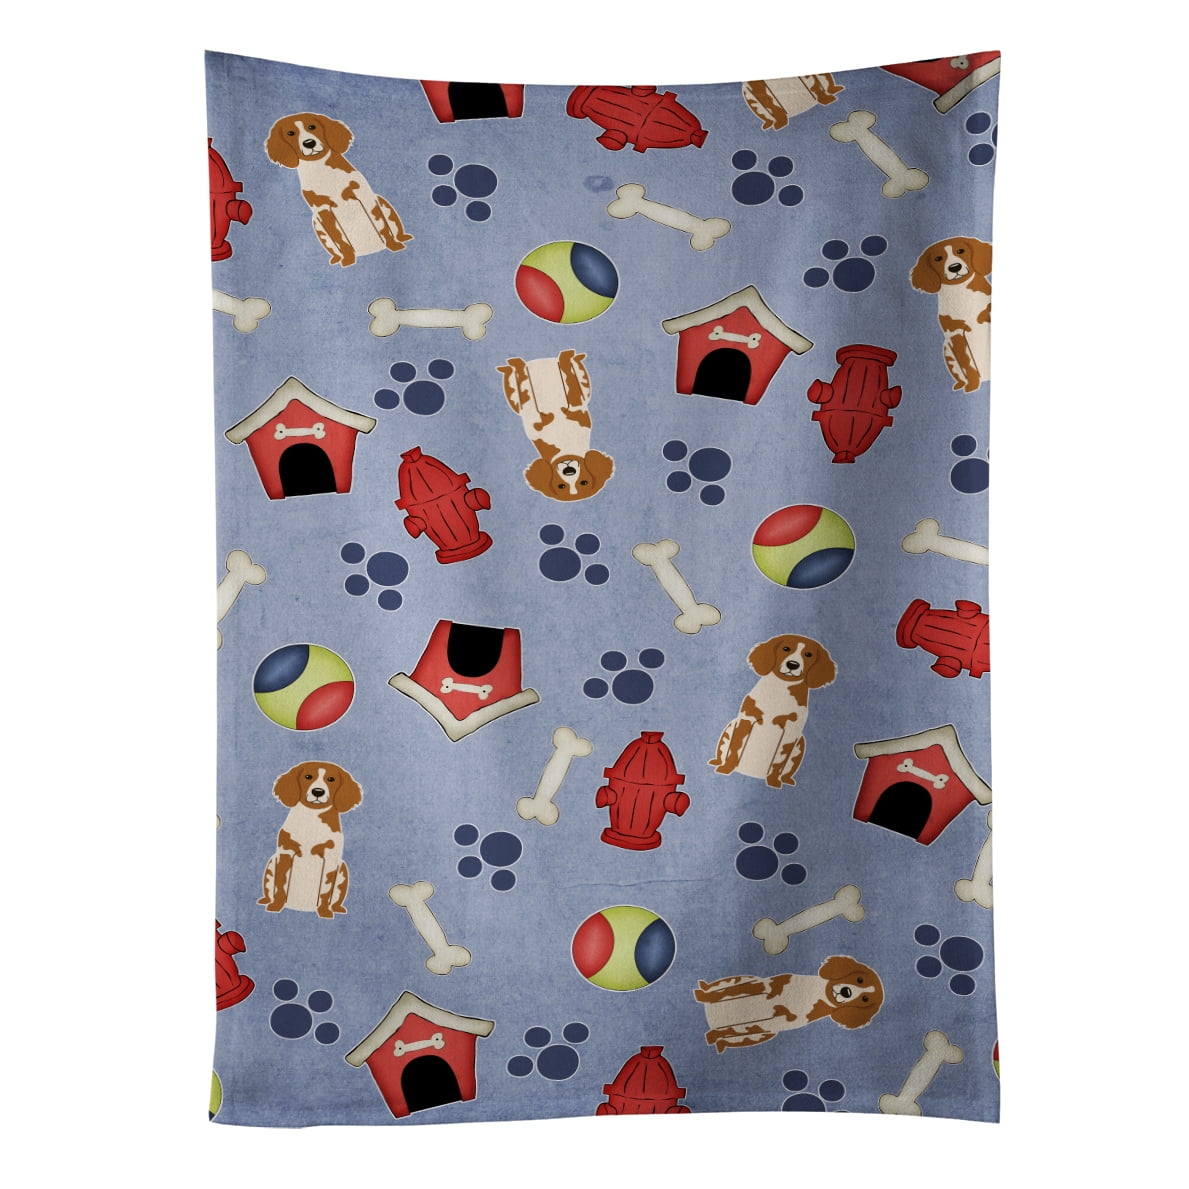 Caroline's Treasures "Caroline's Treasures BB2685KTWL Dog House Brittany Spaniel Kitchen Towel, 25"" x 15"", Multicolor"